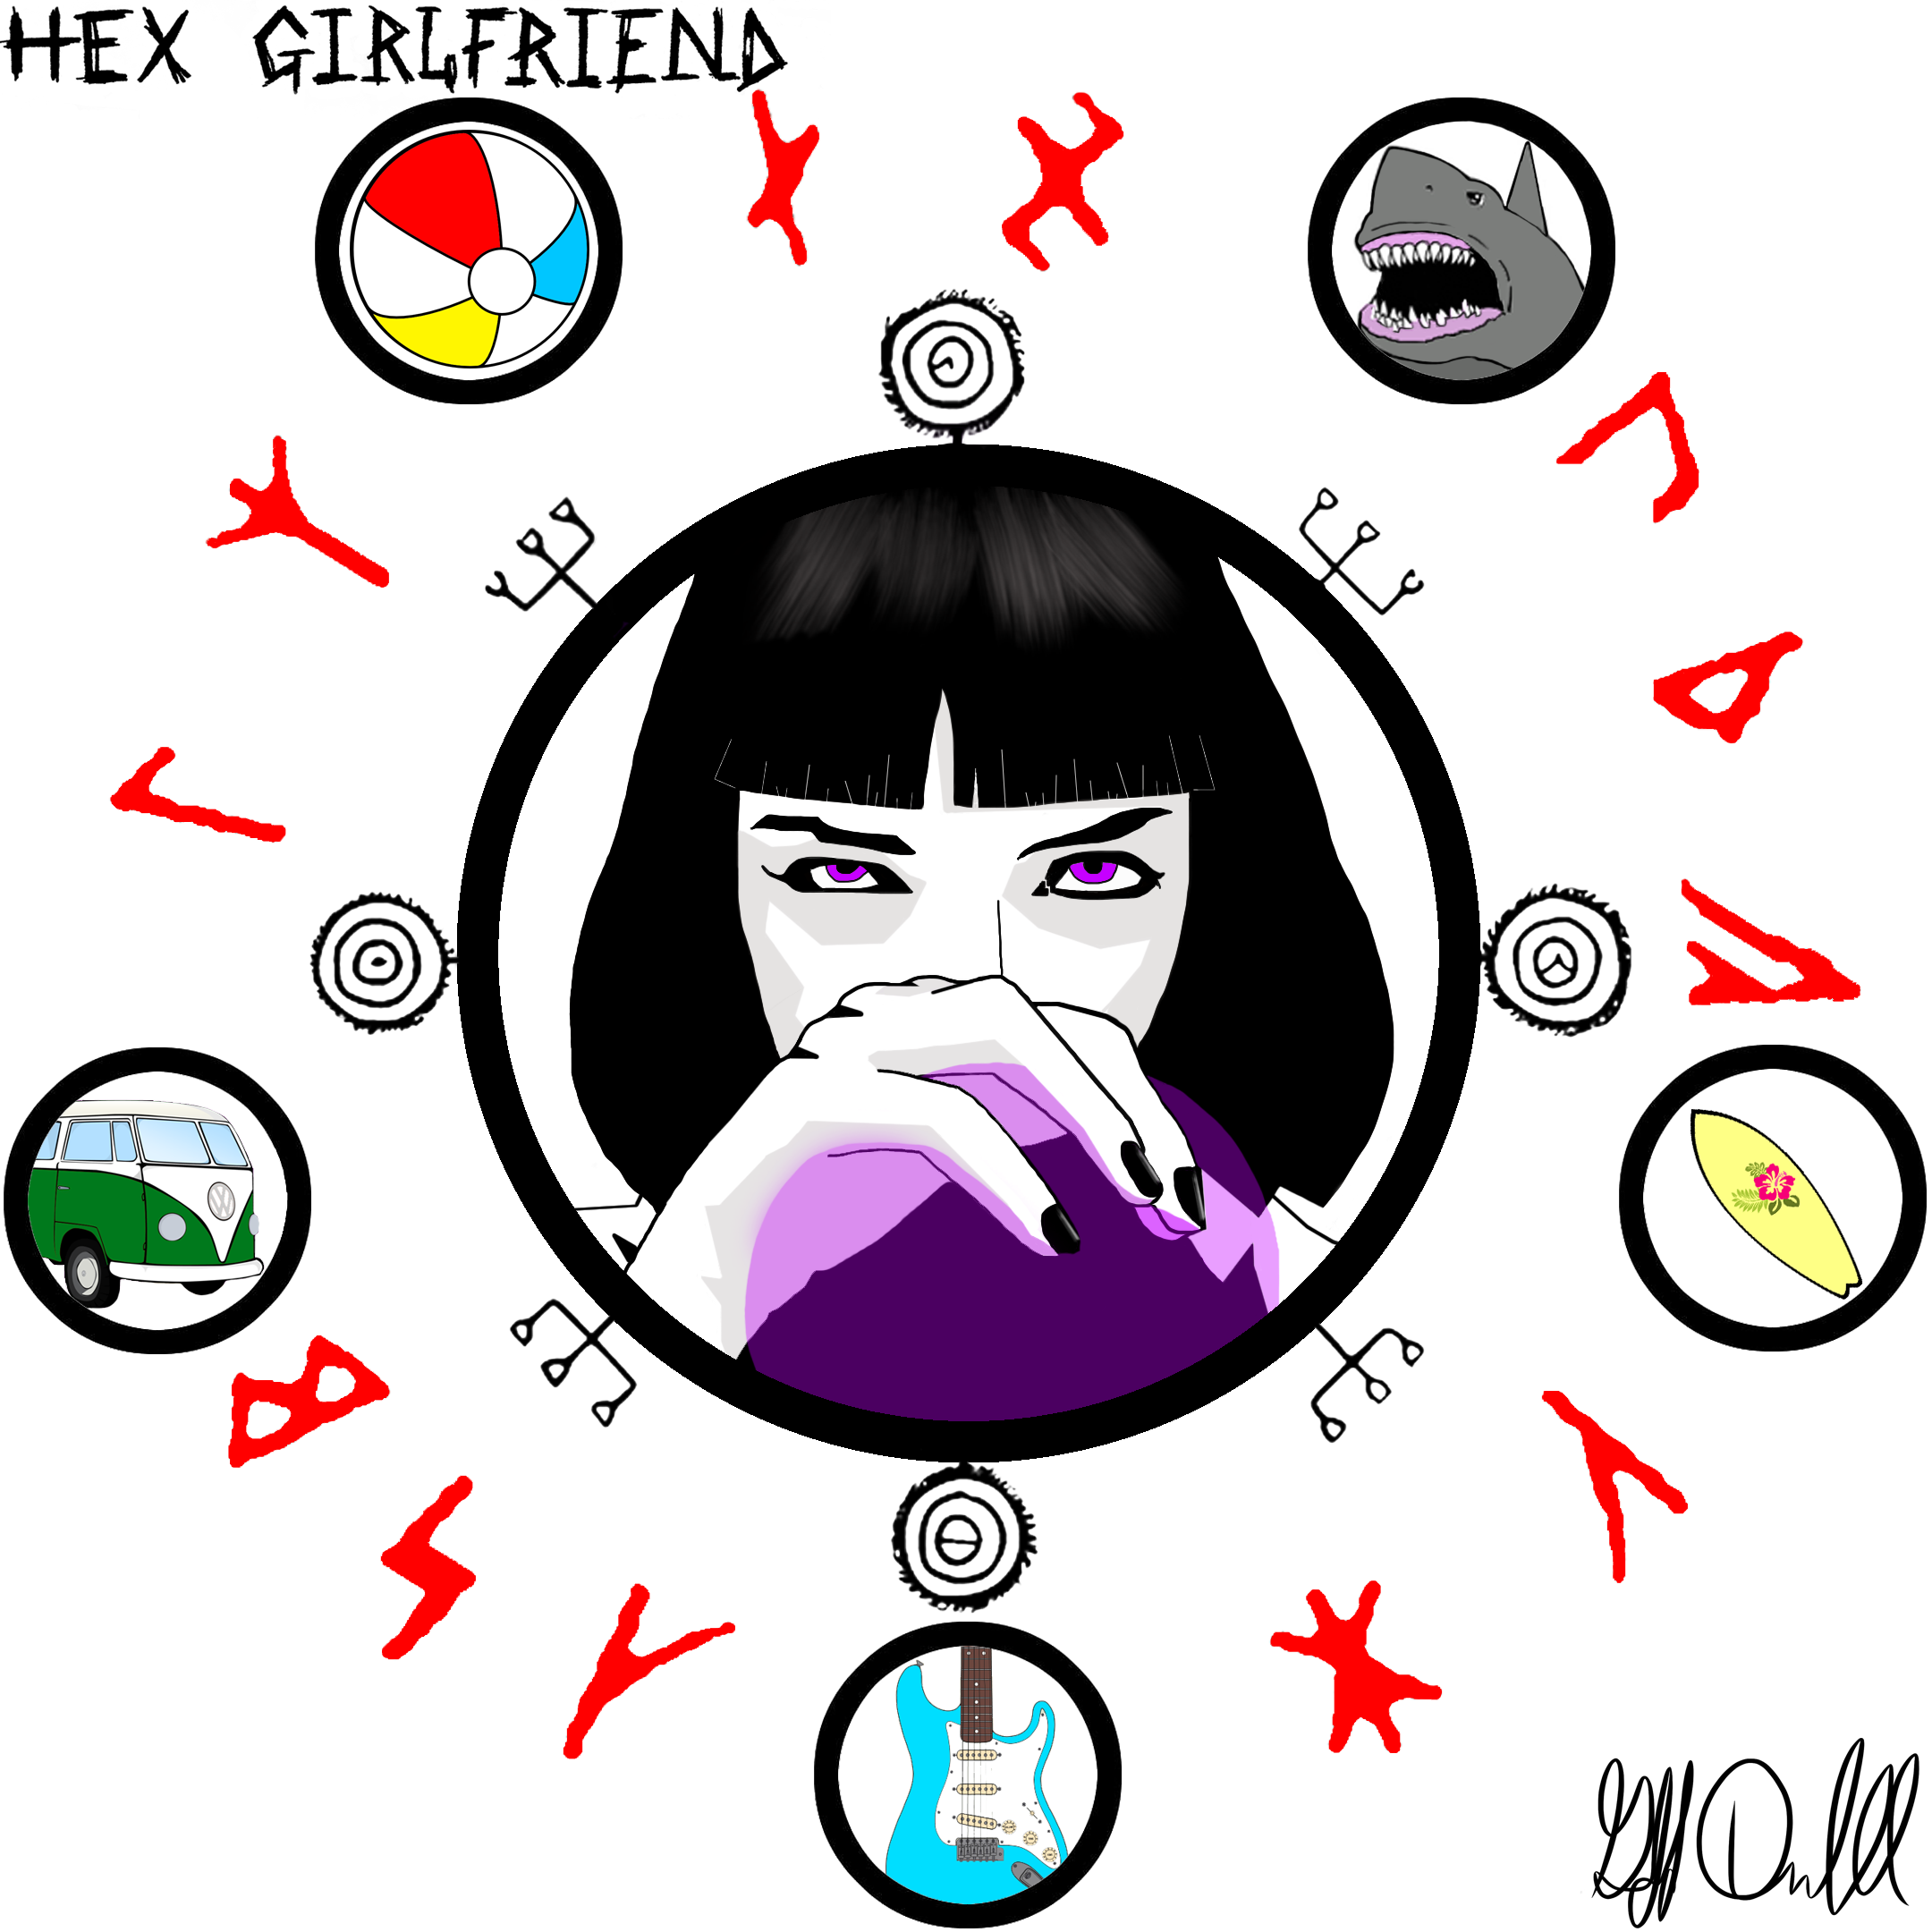 Hex Girlfriend Cover